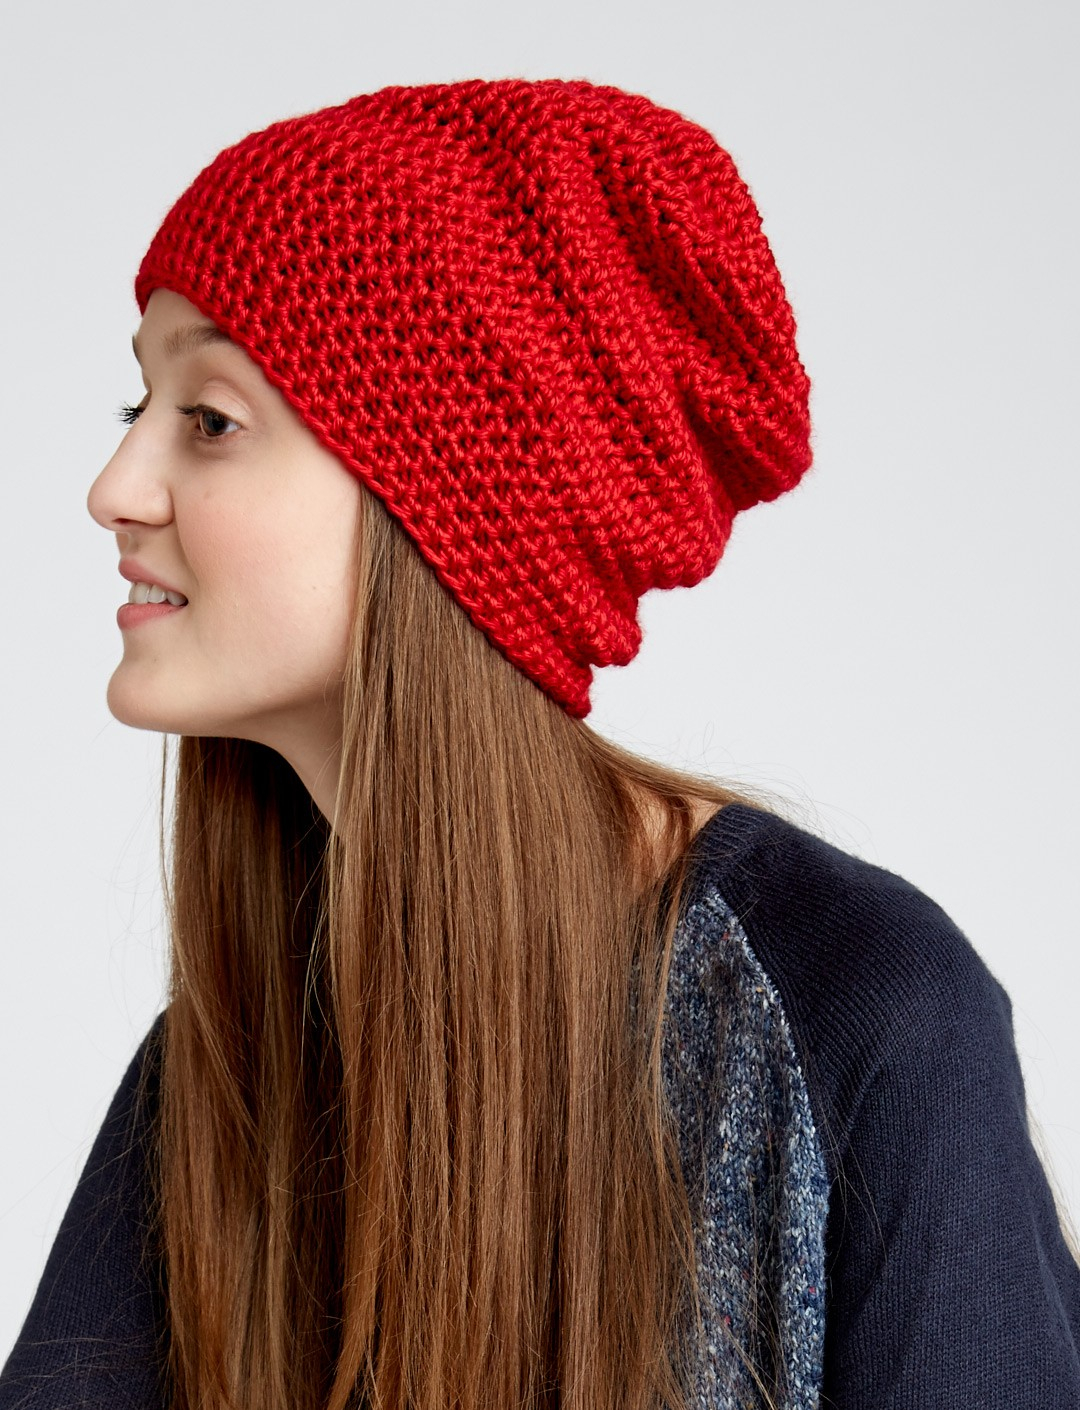 Easy Crochet Slouchy Hat Pattern Slouchy Beanie Crochet Patterns To Try Out Crochet And Knitting